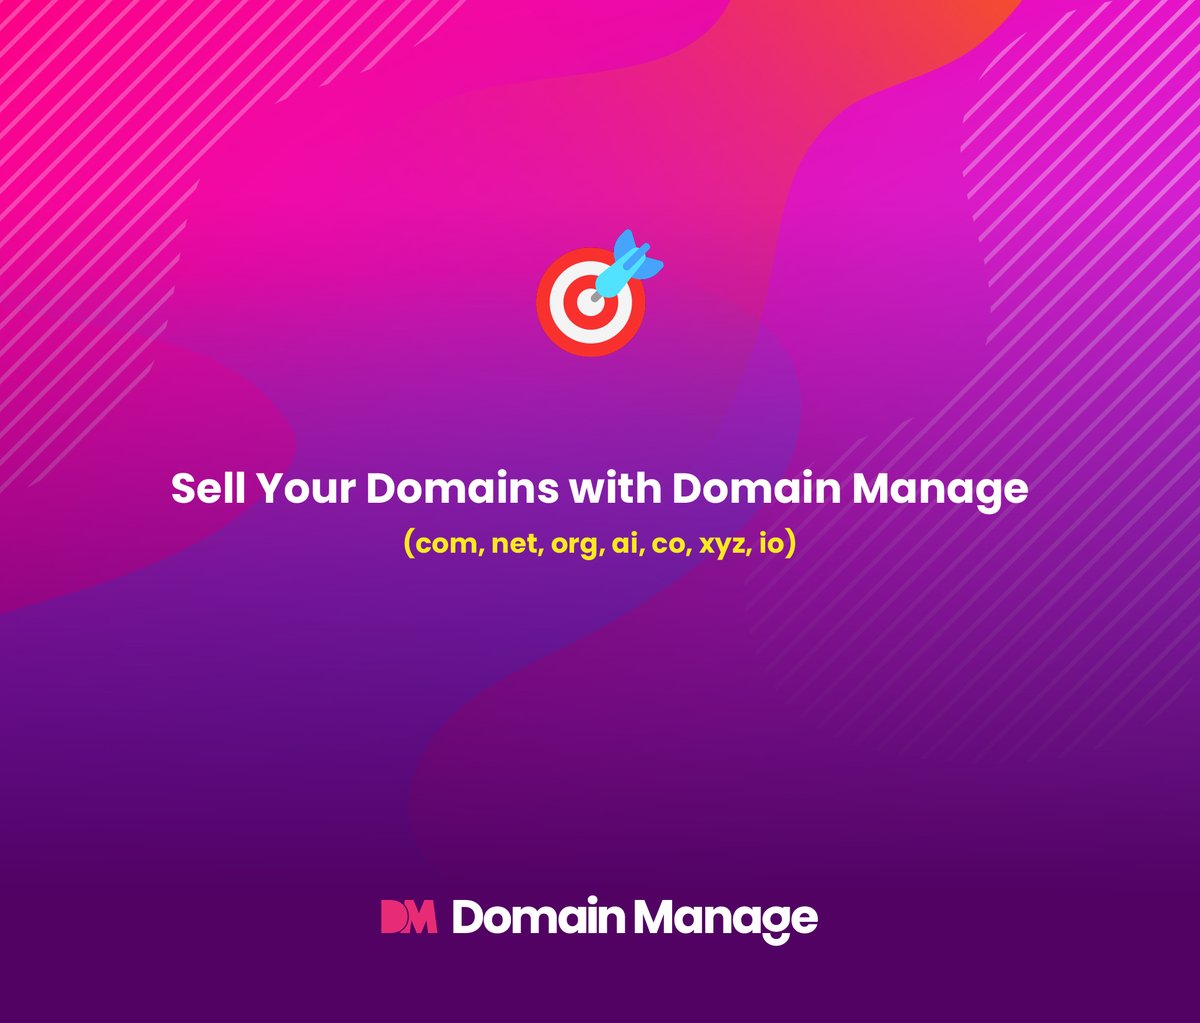 Sell Your Domains With Domain Manage 🚀 Fully Managed 🚀 1,000 Domains Minimum 🚀 Sale/Voucher Codes 🚀 30 Day Money Back Guarantee 🚀 Dedicated Account Manager Coming Soon (30th June) 🚀 Domain Loans 🚀 Full Checkout + Crypto 🚀 Auto-Outbound domainmanage.com/register